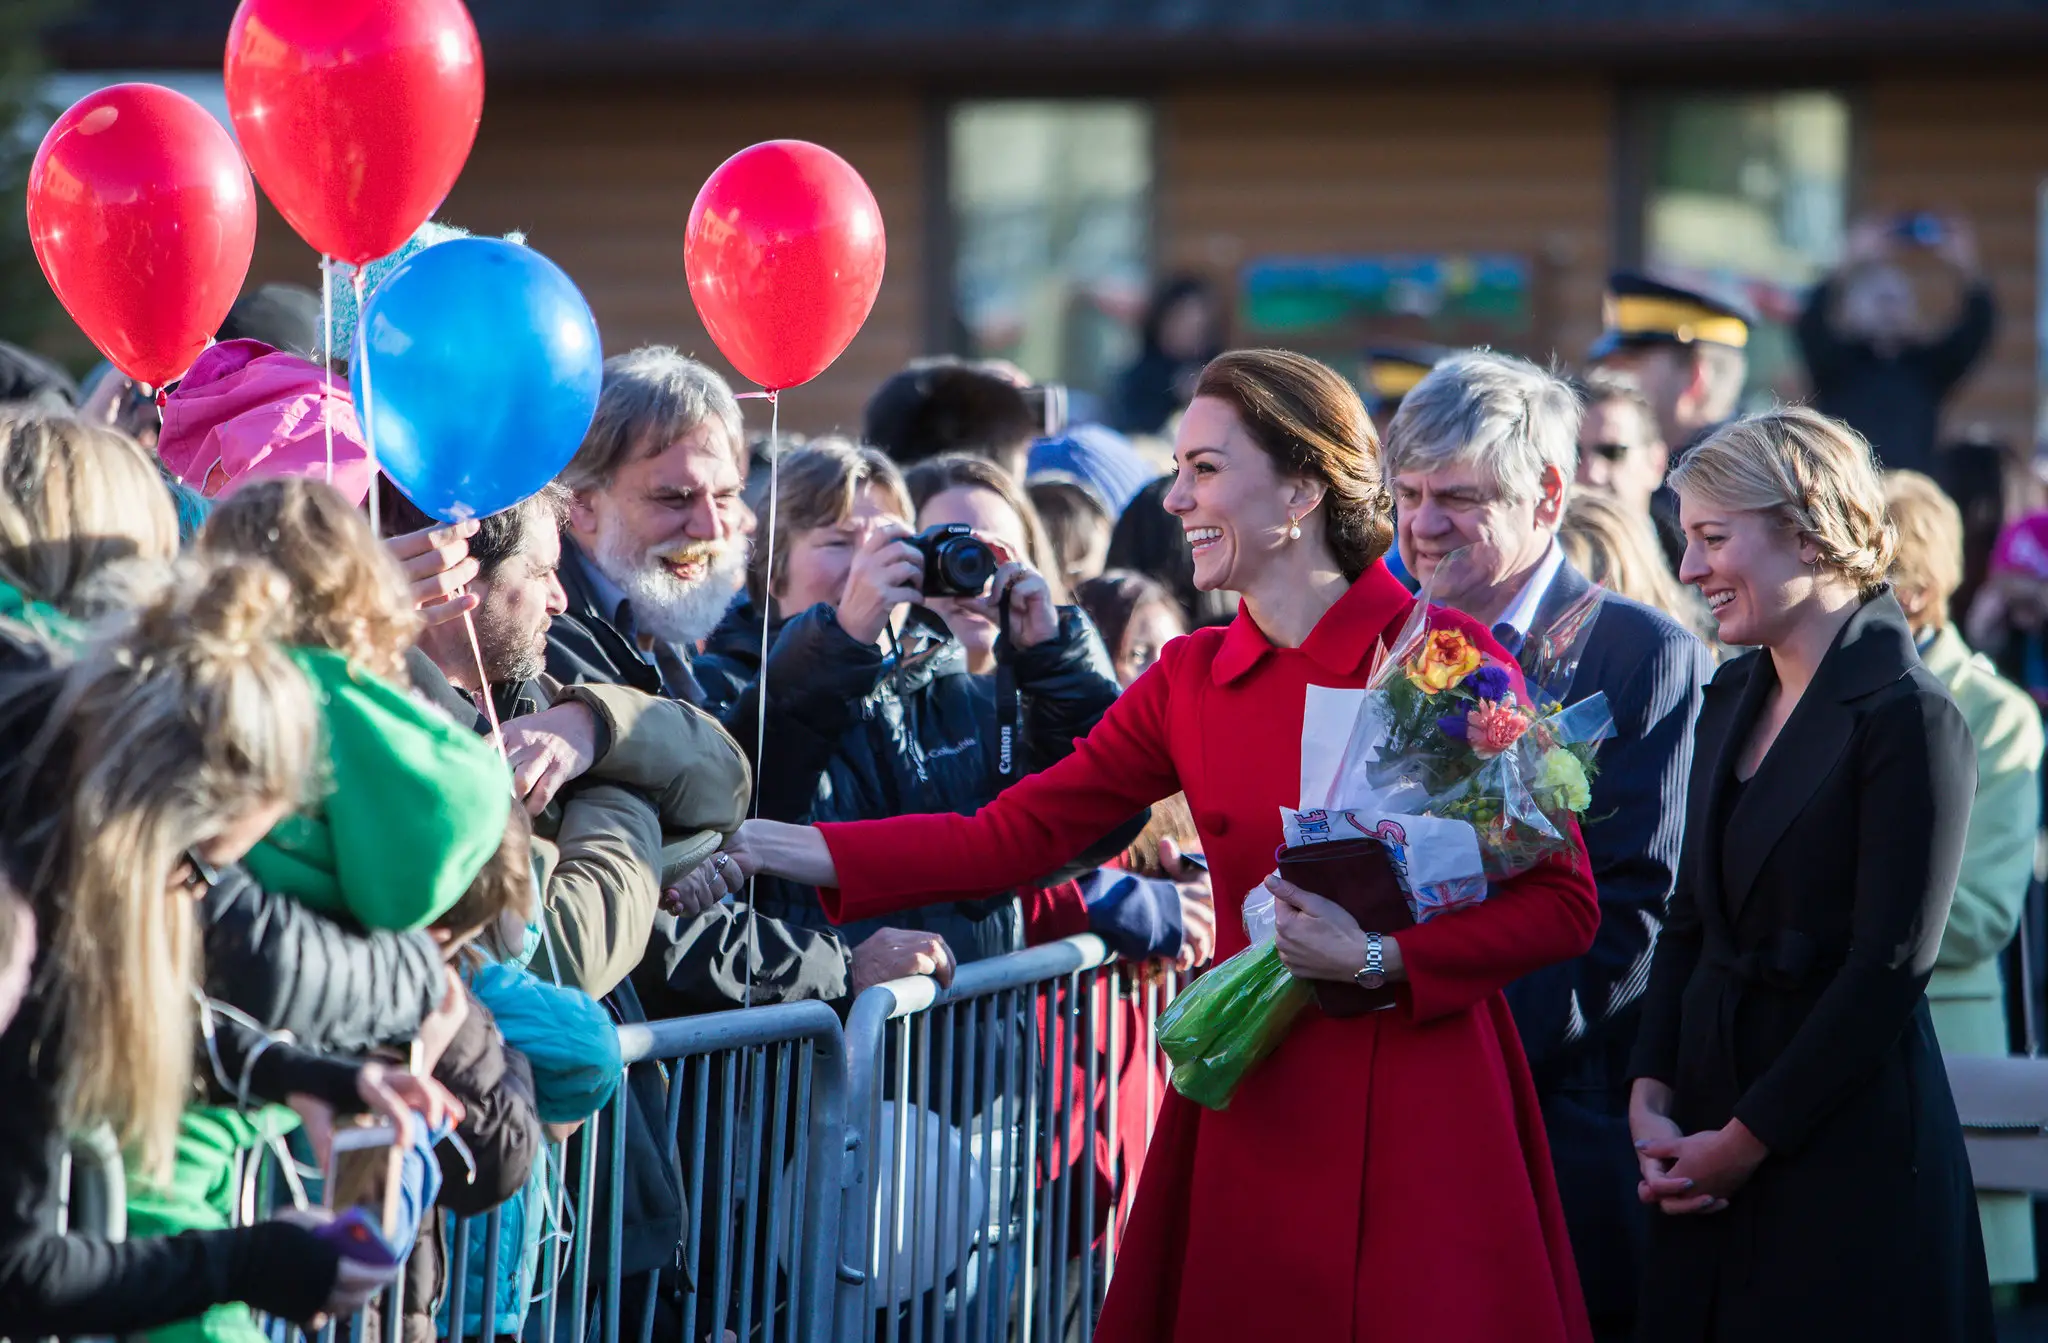 The Duke and Duchess of cambridge met with public in whitehorse